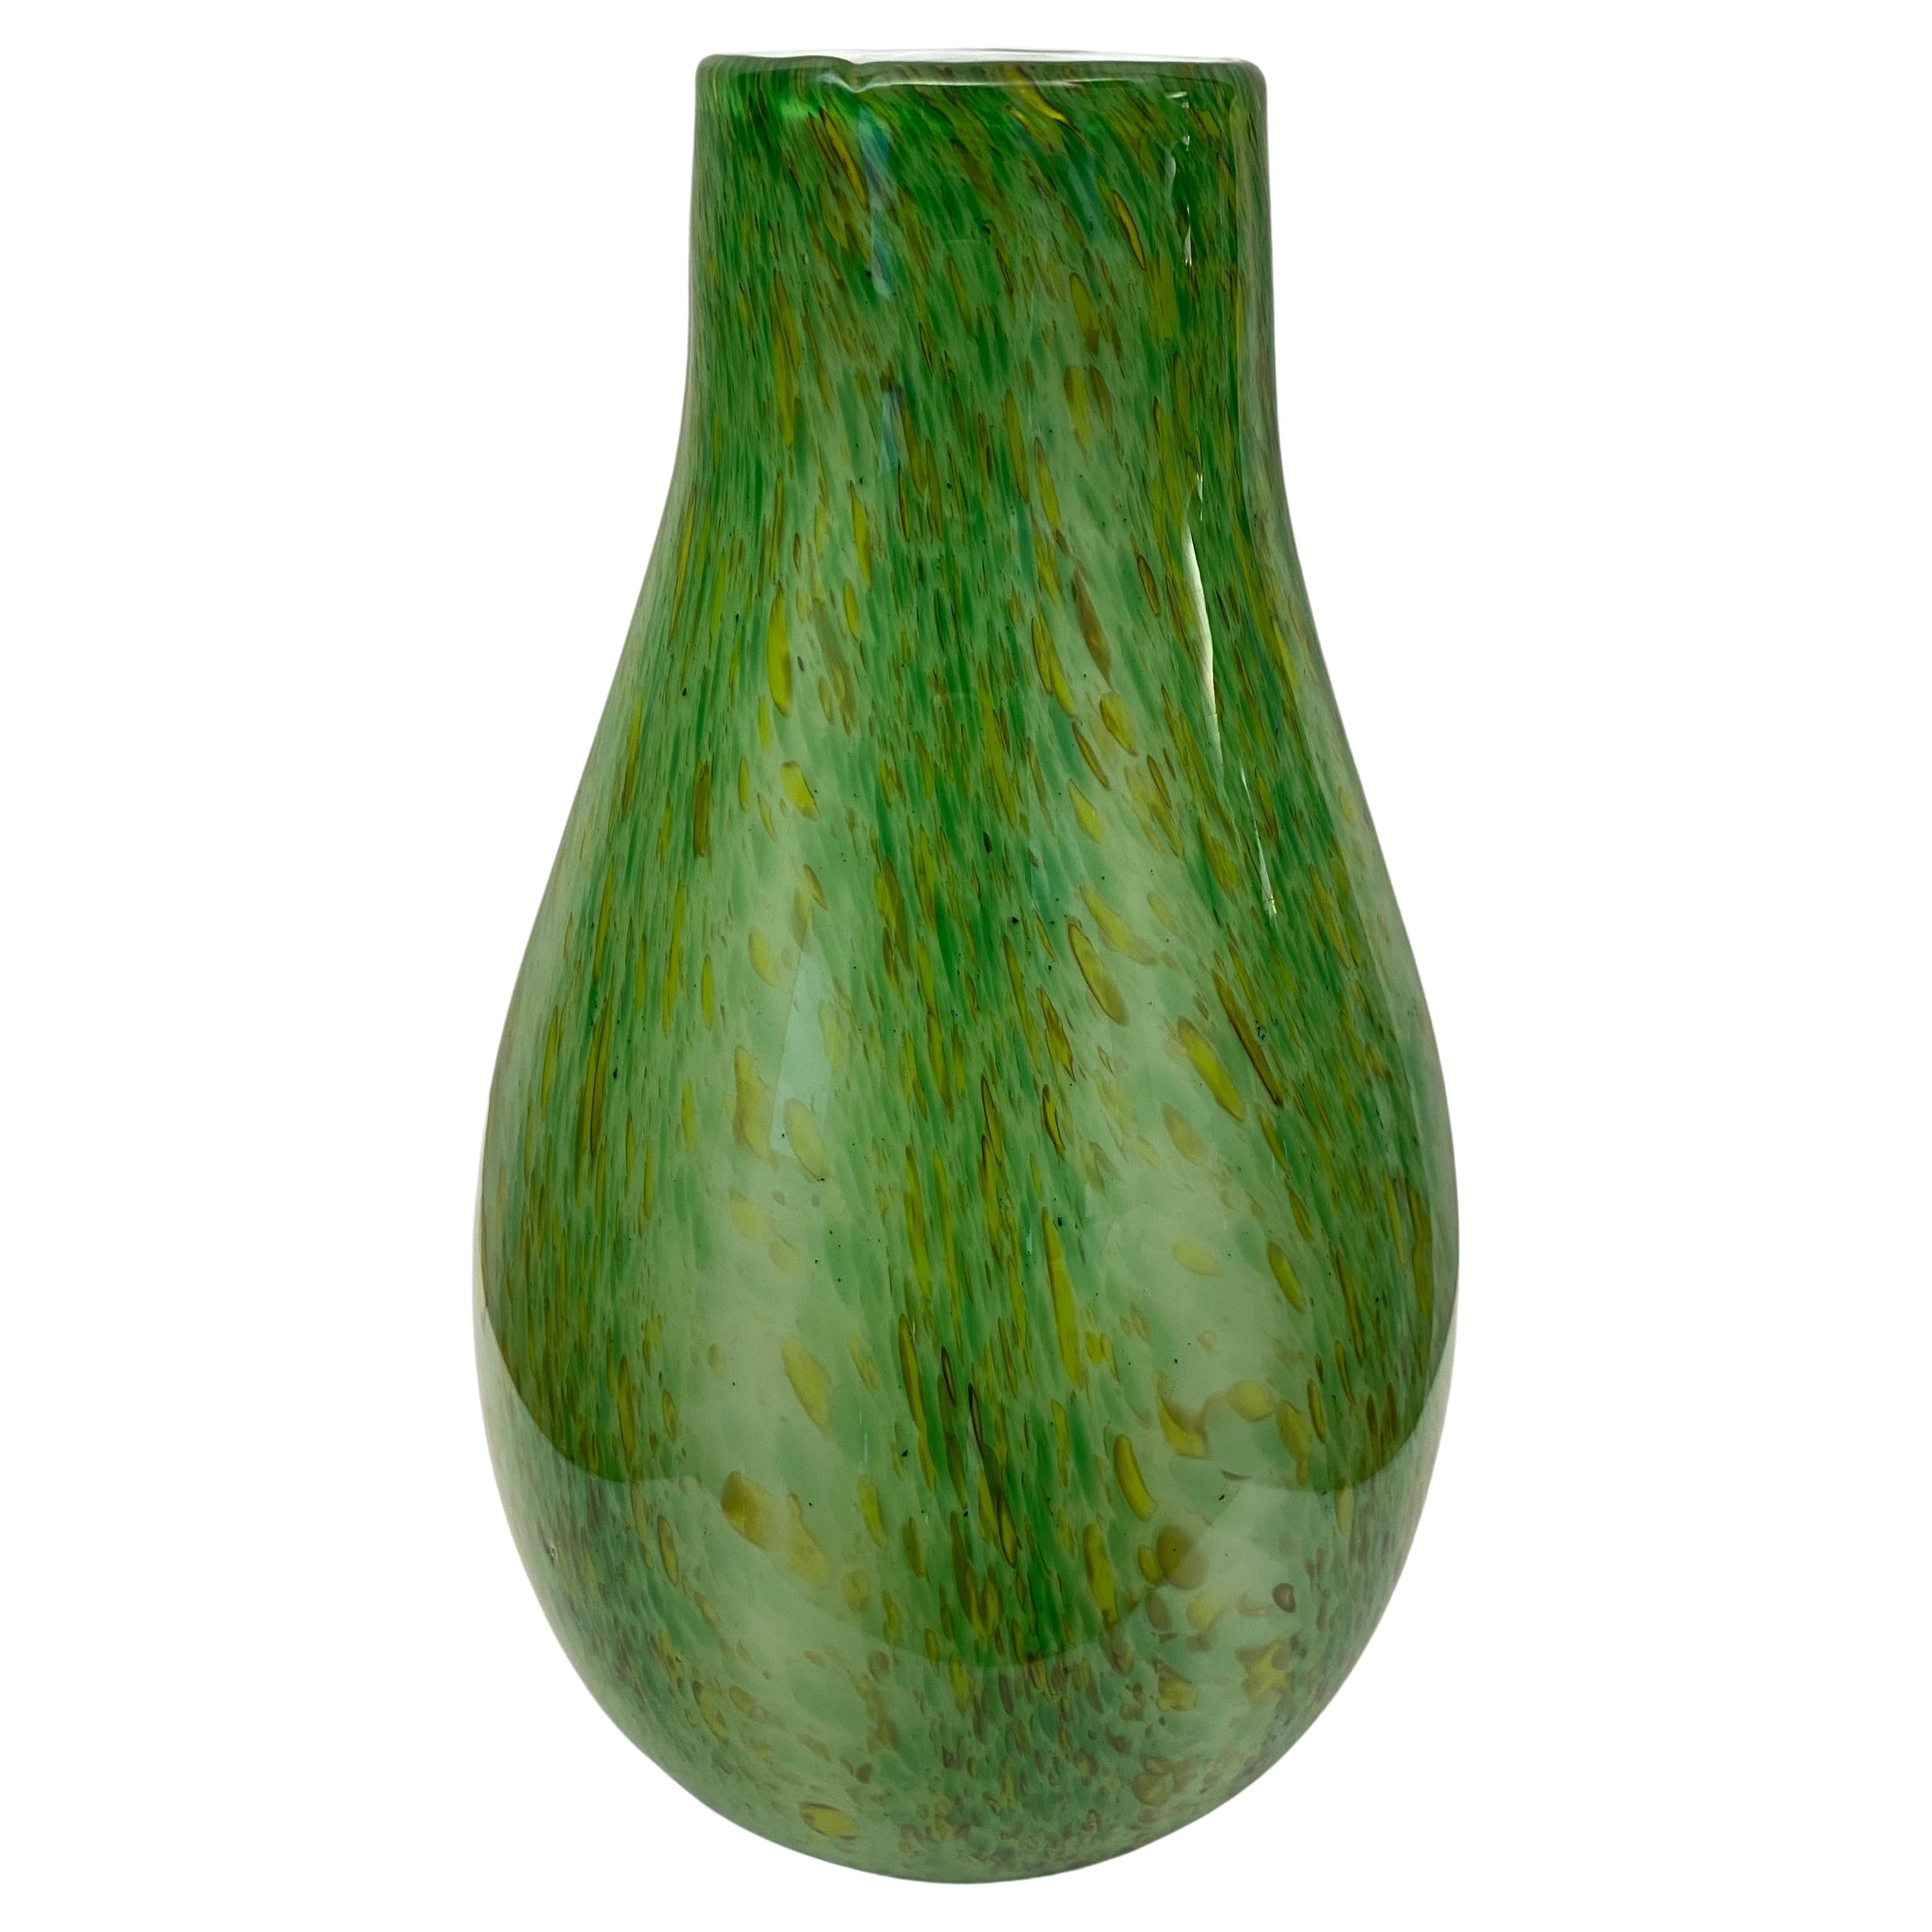 Formia Green Murano Art Glass Vase in the manner of Hilton McConnico For Sale